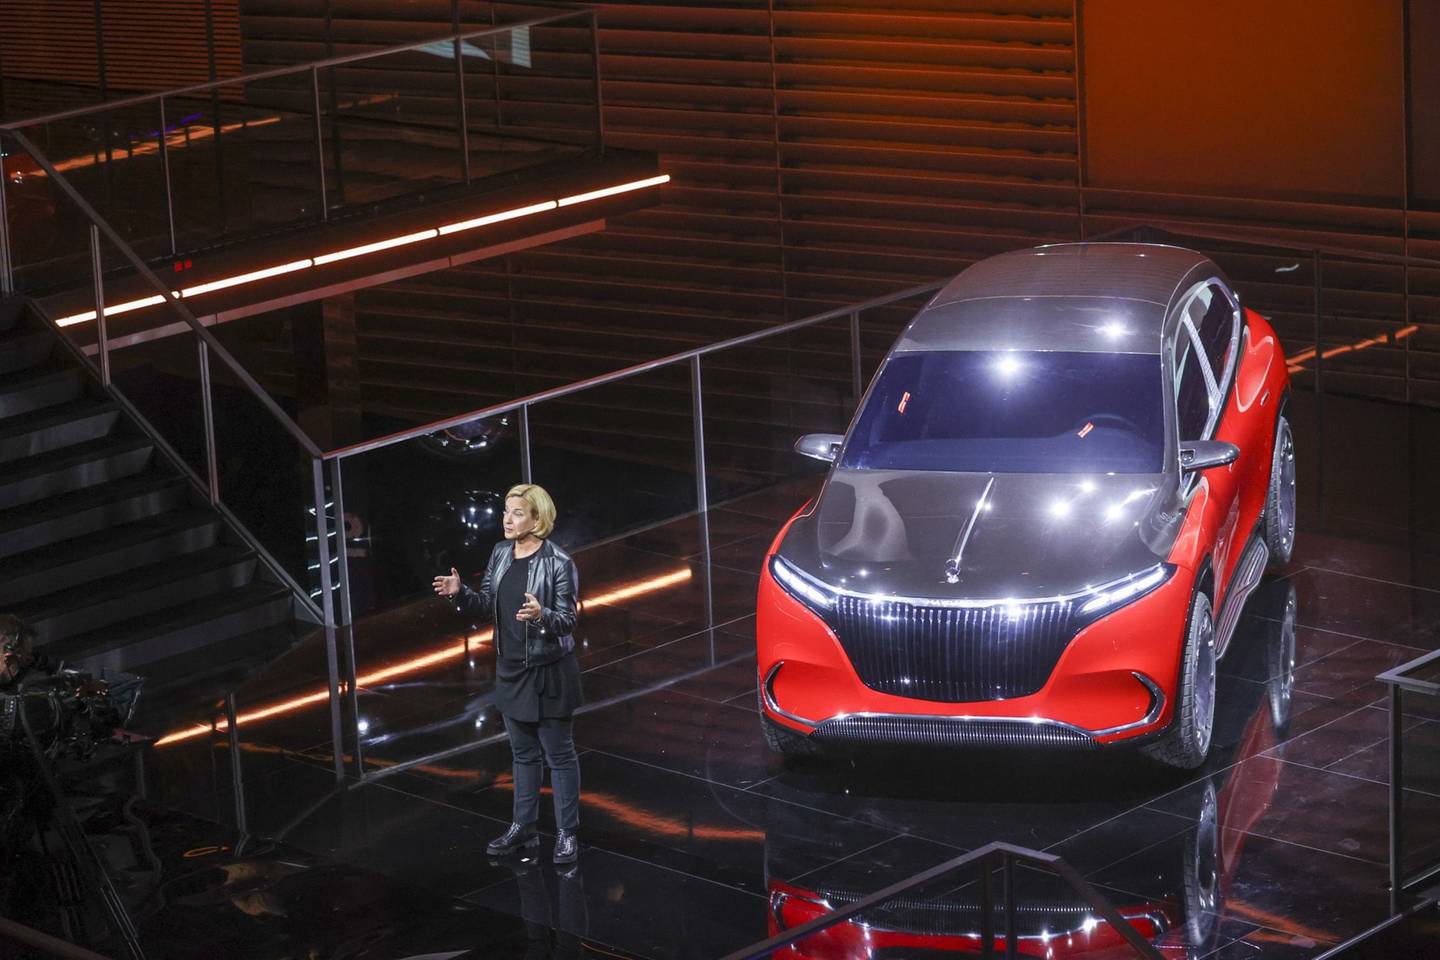 Britta Seeger, a member of Daimler's management board, speaks while unveiling the Mercedes-Maybach EQS. The bulky luxury SUV includes massive amounts of chrome, 24-inch Bowl rims on its wheels and a first-class rear suite with two individual seats, the customary champagne holder and cooling box, and a high-end sound and visual entertainment system. According to Mercedes, a non-Maybach EQS electric SUV will debut in 2022, with the Mercedes-Maybach EQS likely to follow. Photographer: Alex Kraus/Bloombergdfd